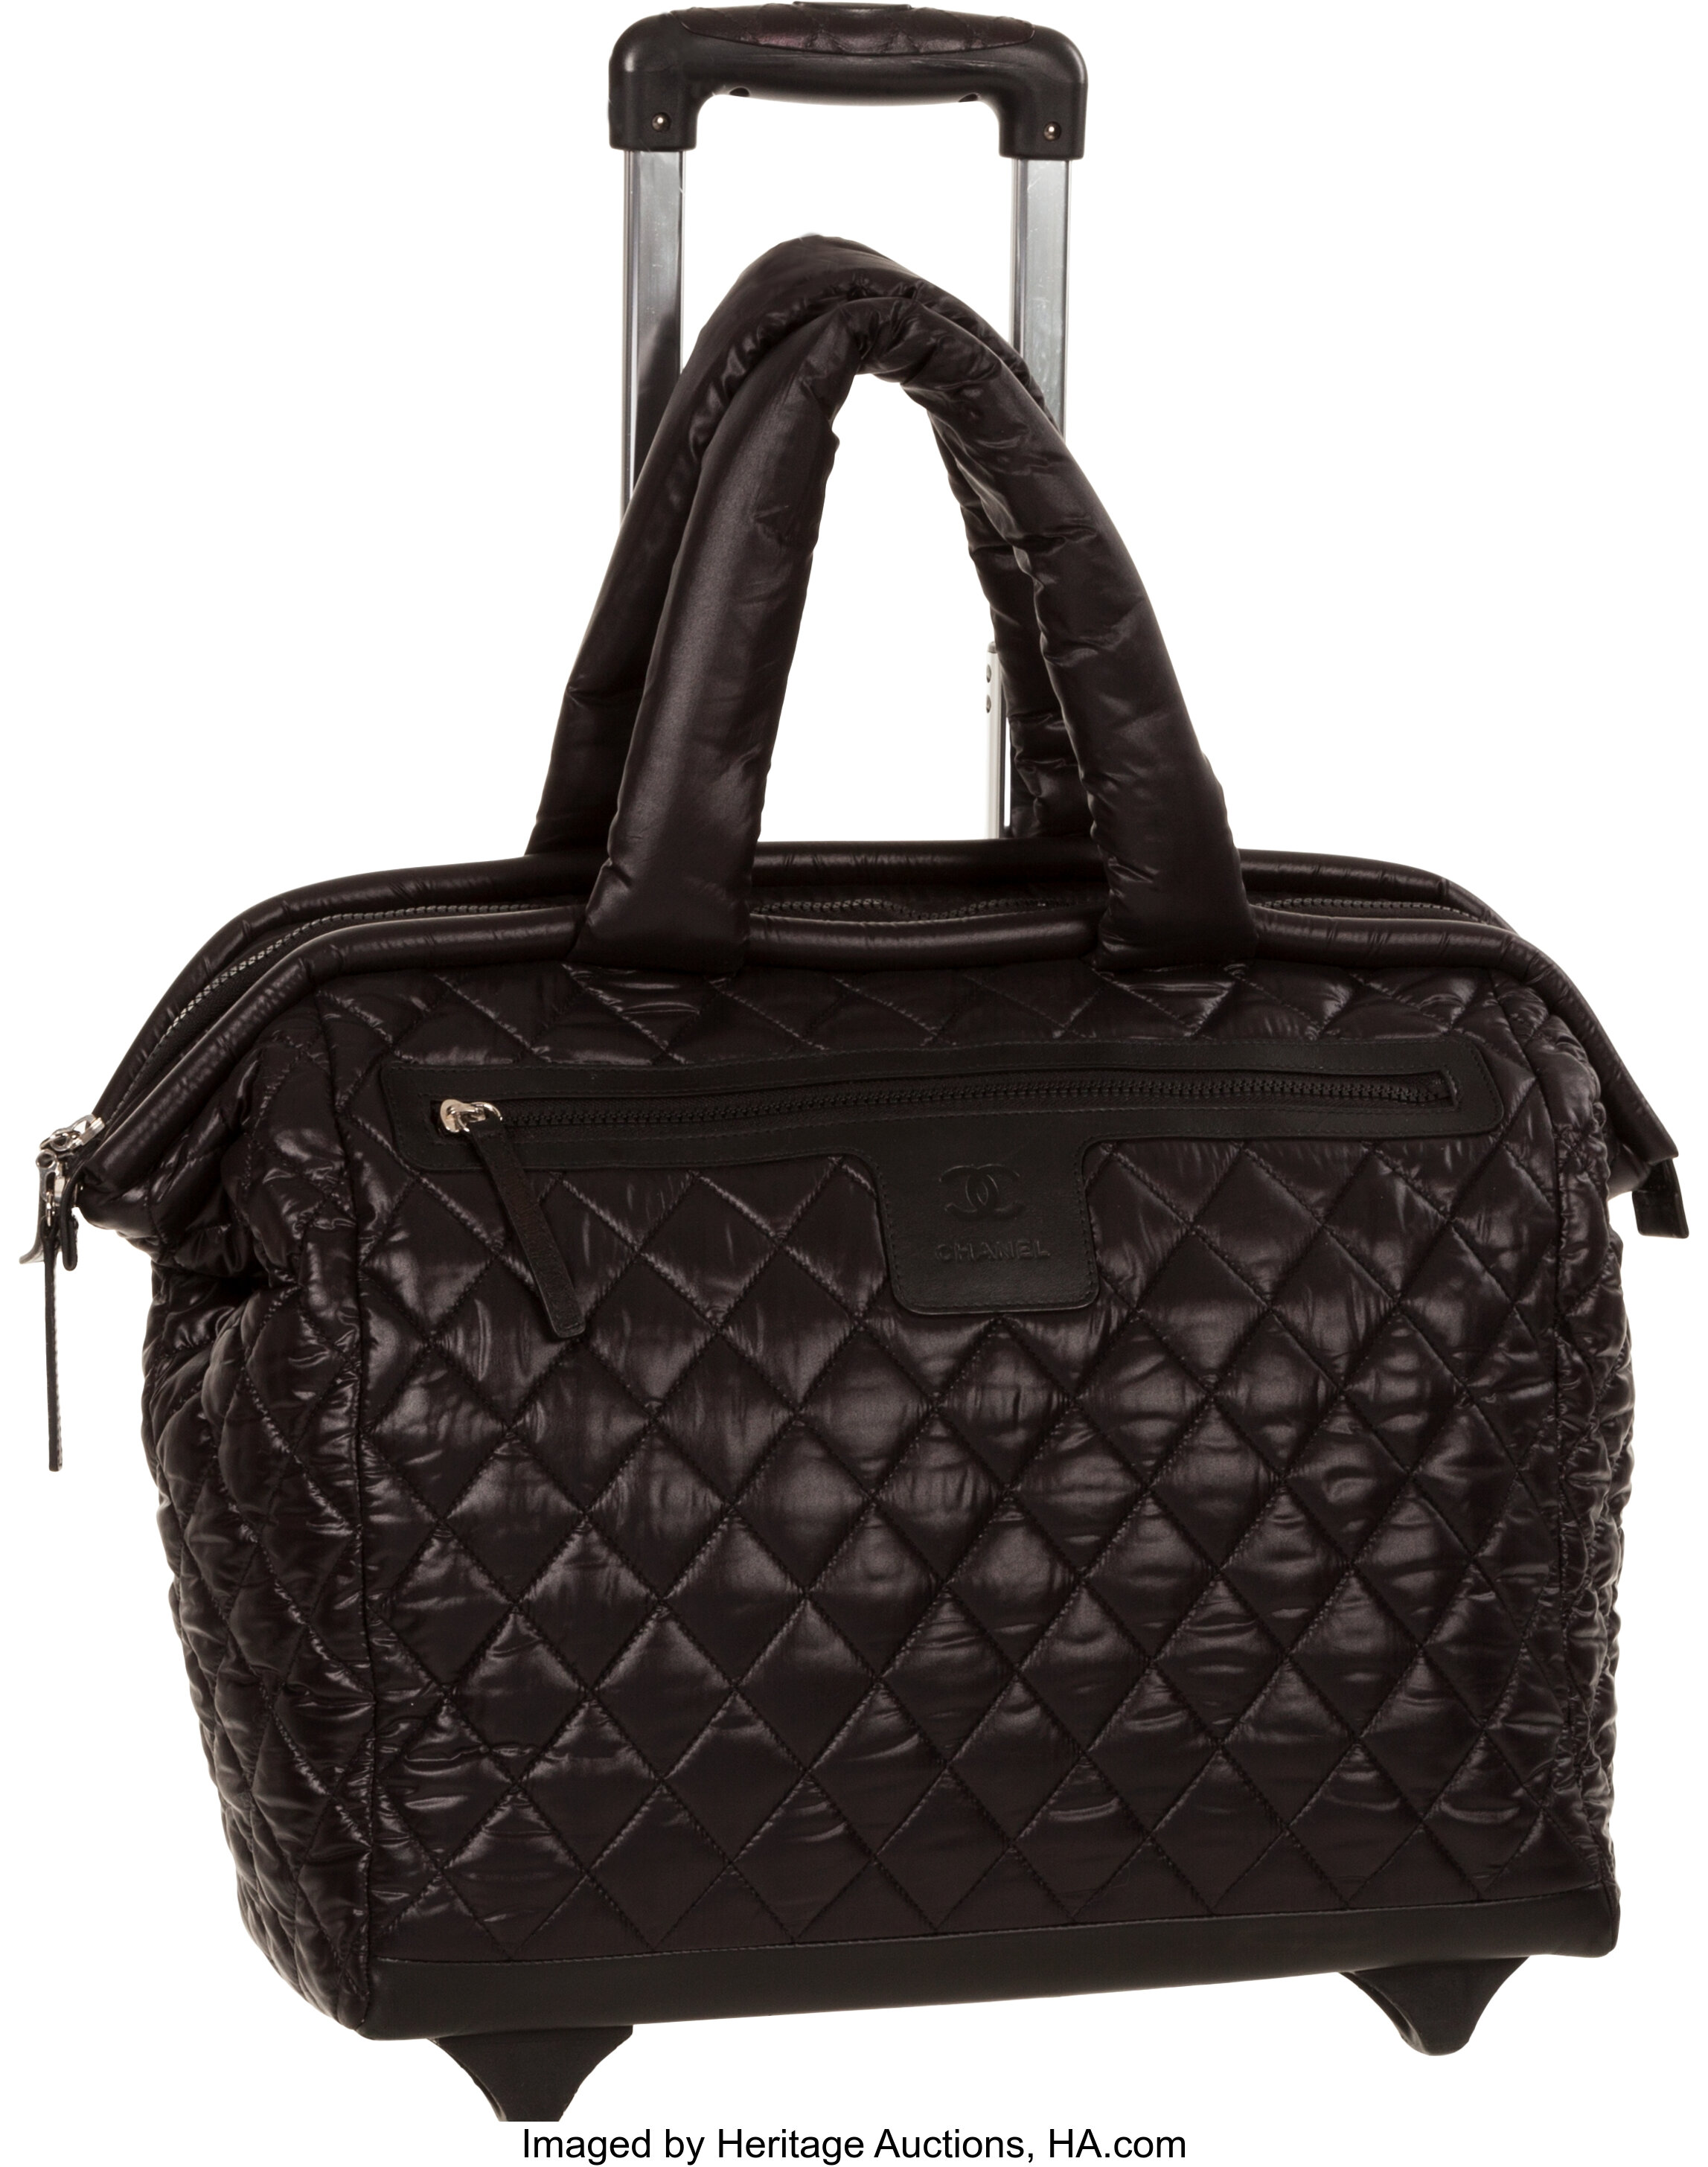 Chanel Large Travel Bag - THE HOUSE OF WAUW